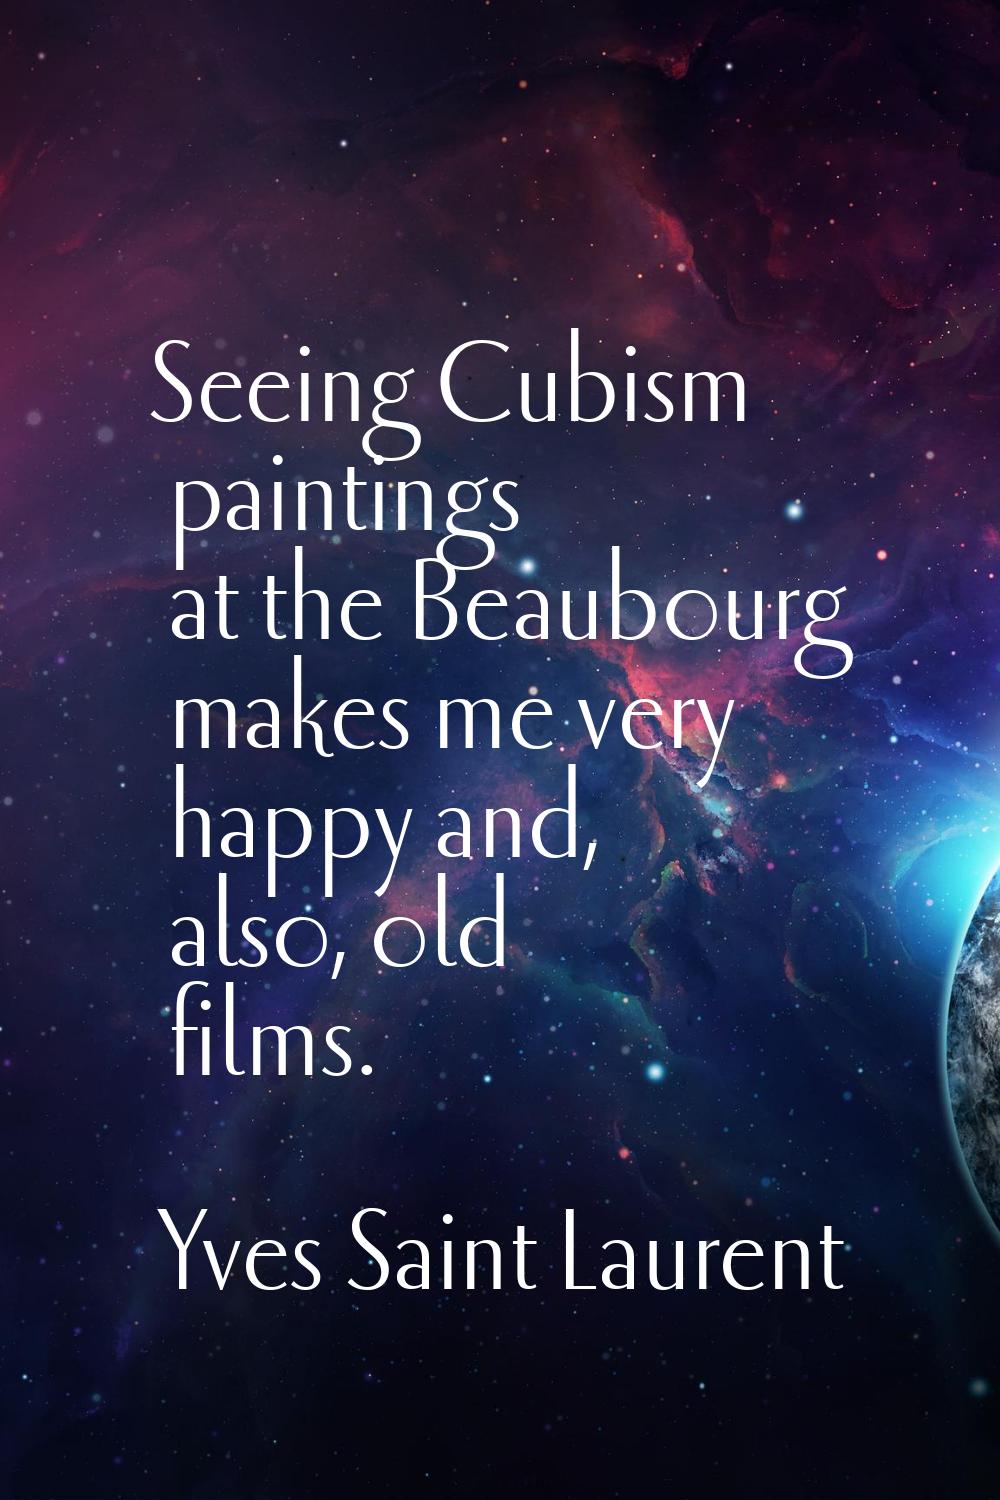 Seeing Cubism paintings at the Beaubourg makes me very happy and, also, old films.